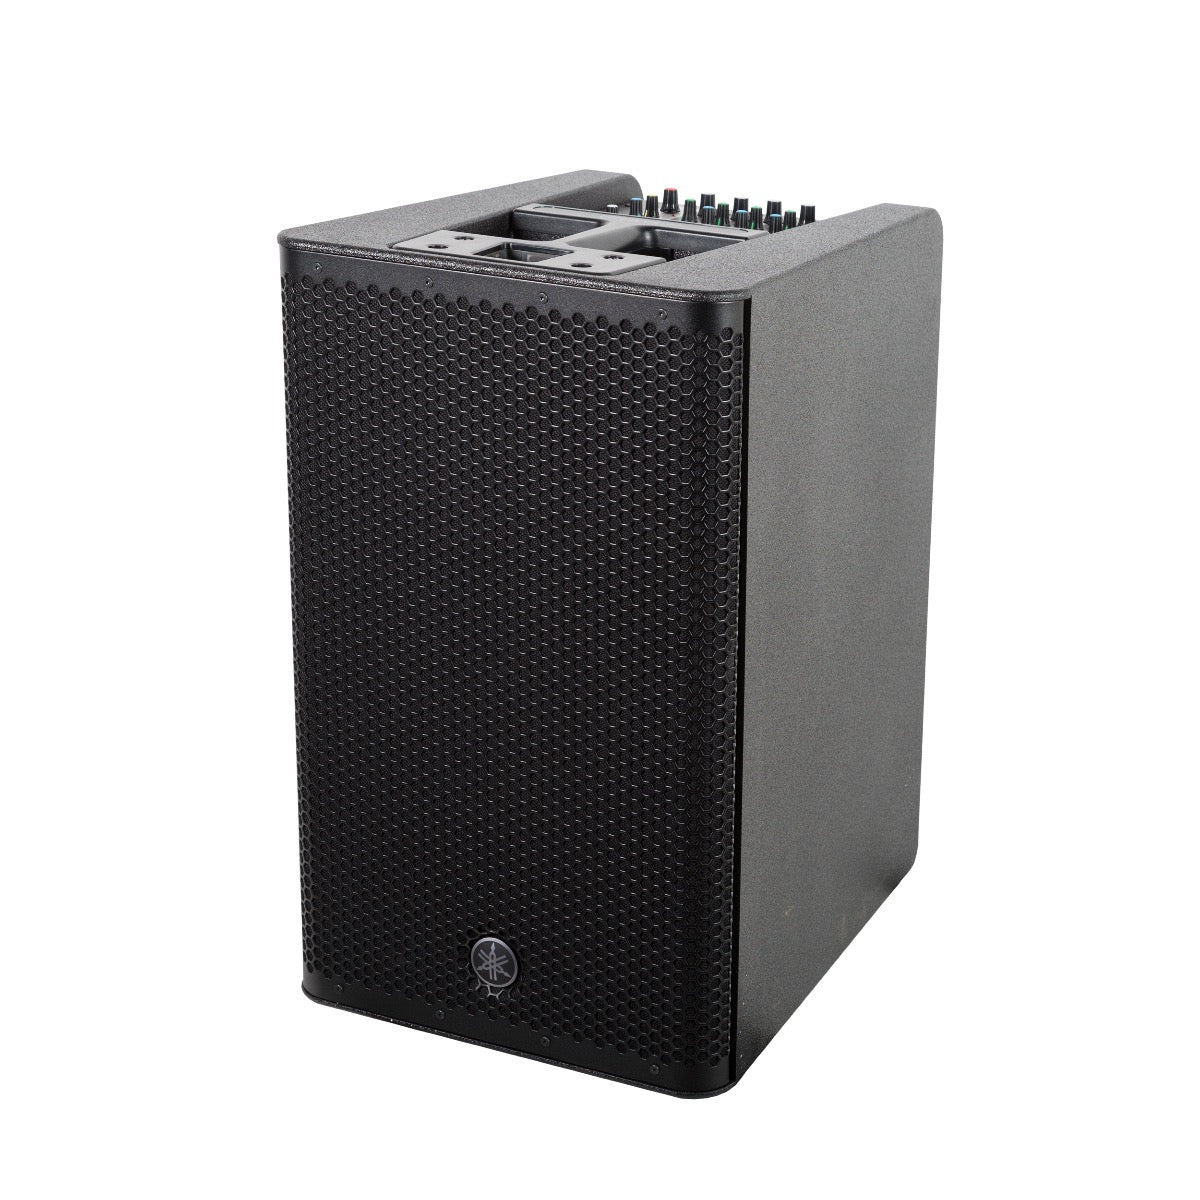 Yamaha STAGEPAS 1K Column Type 1000W Portable PA System w/ Cover